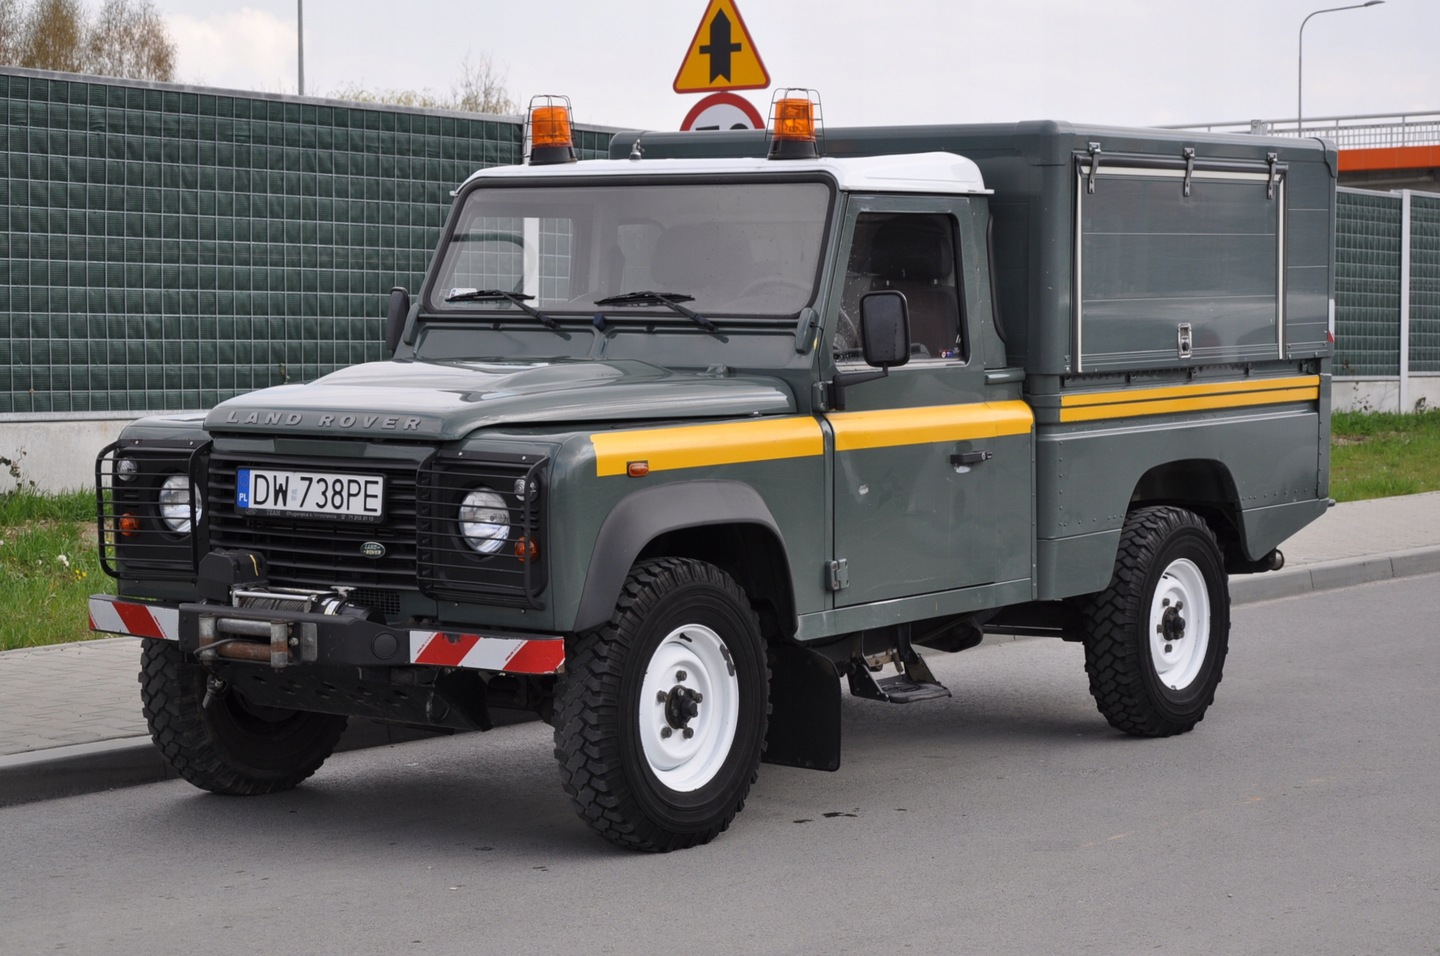 Land Rover Defender III 90 Hard Top 2.4 TD4 122KM 2011 Land Rover Defender Krajowy 100% Bezwypadkowy 2 Os